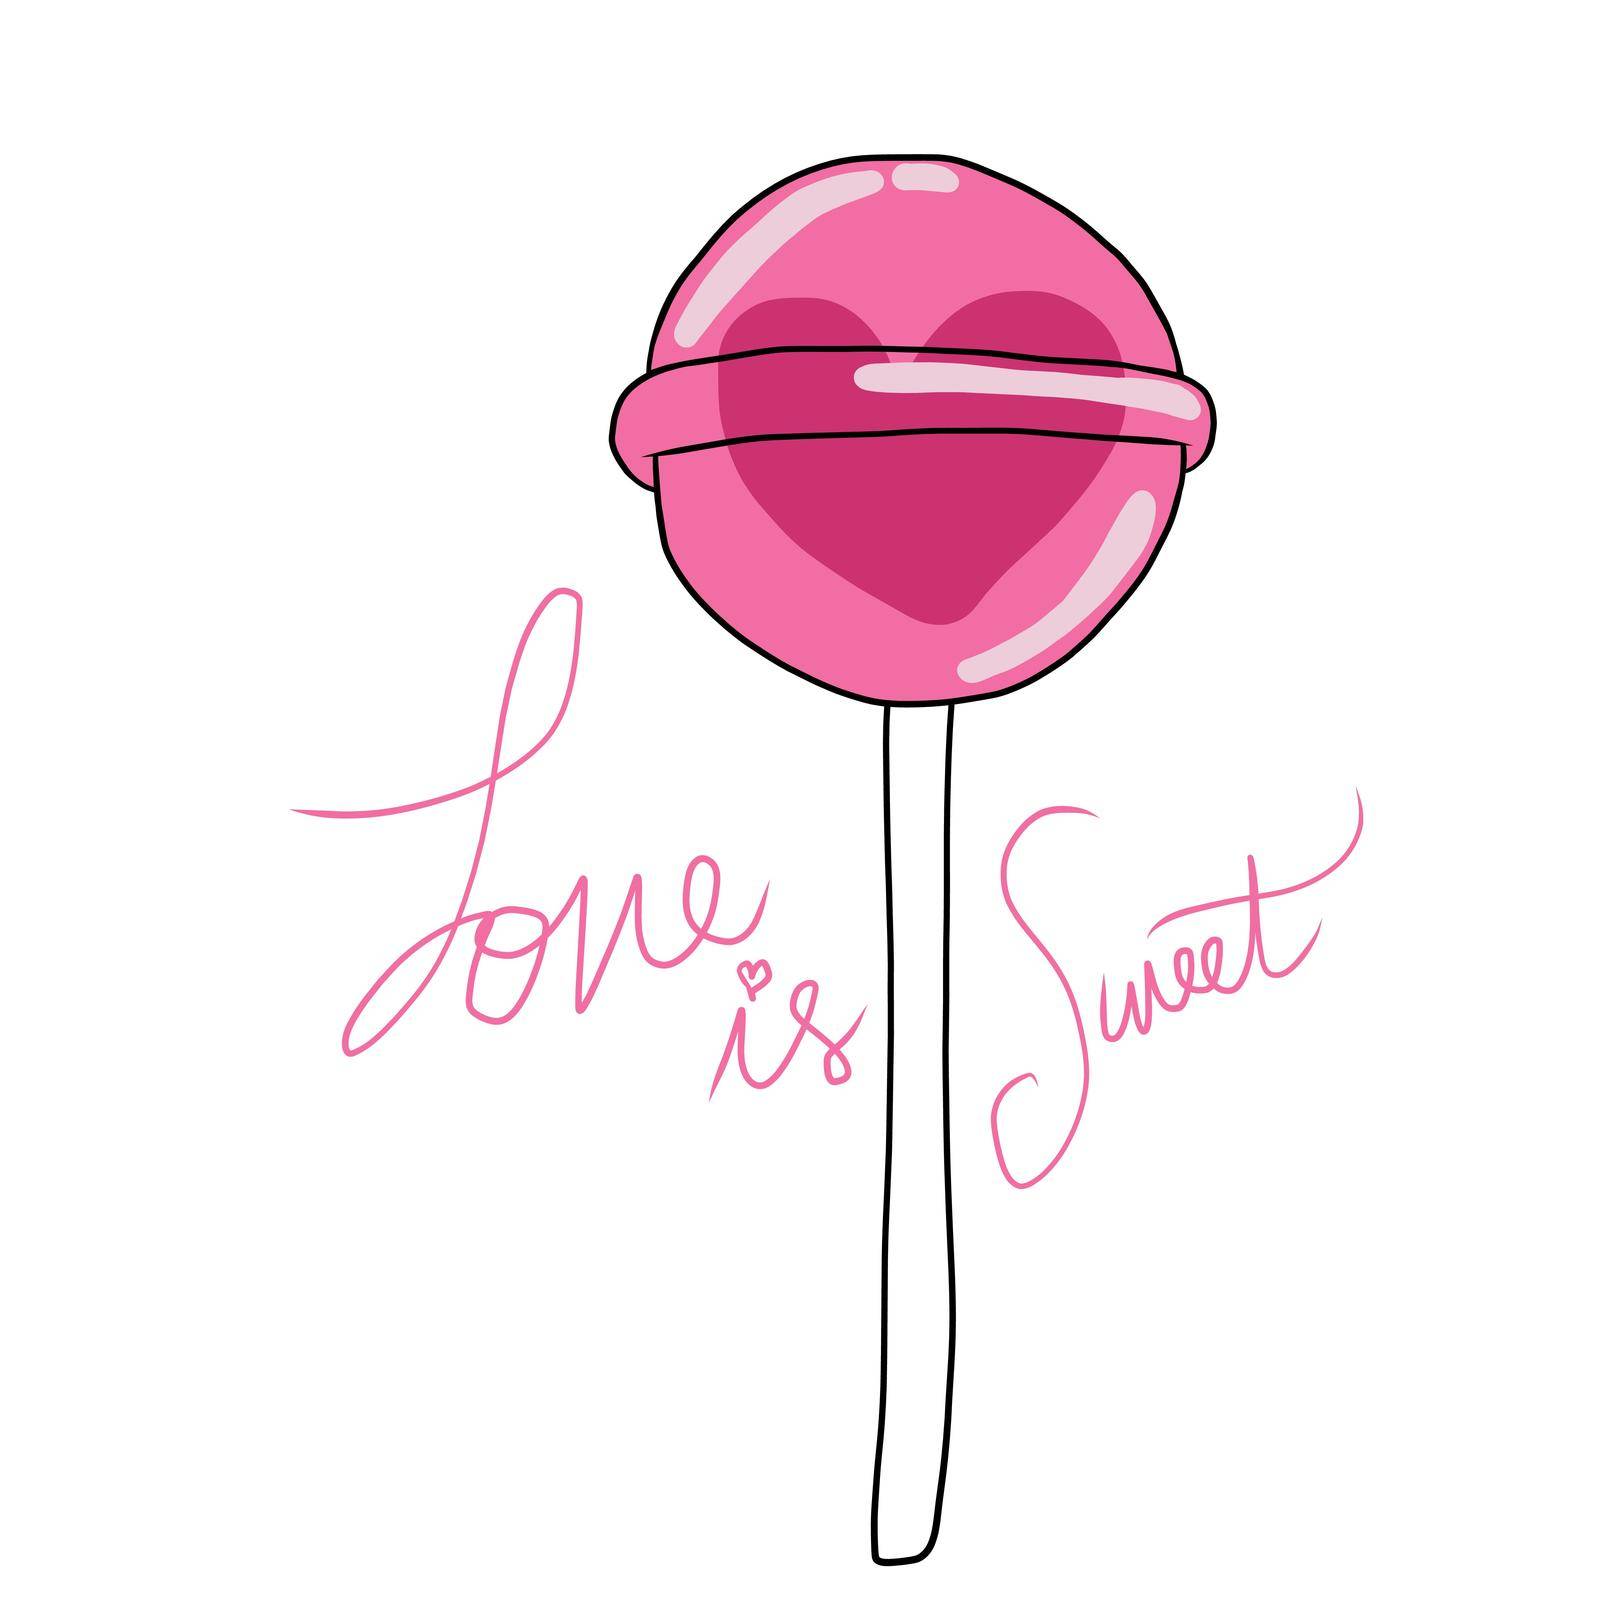 Love is sweet, candy with heart inside cartoon vector illustration by Yoopho